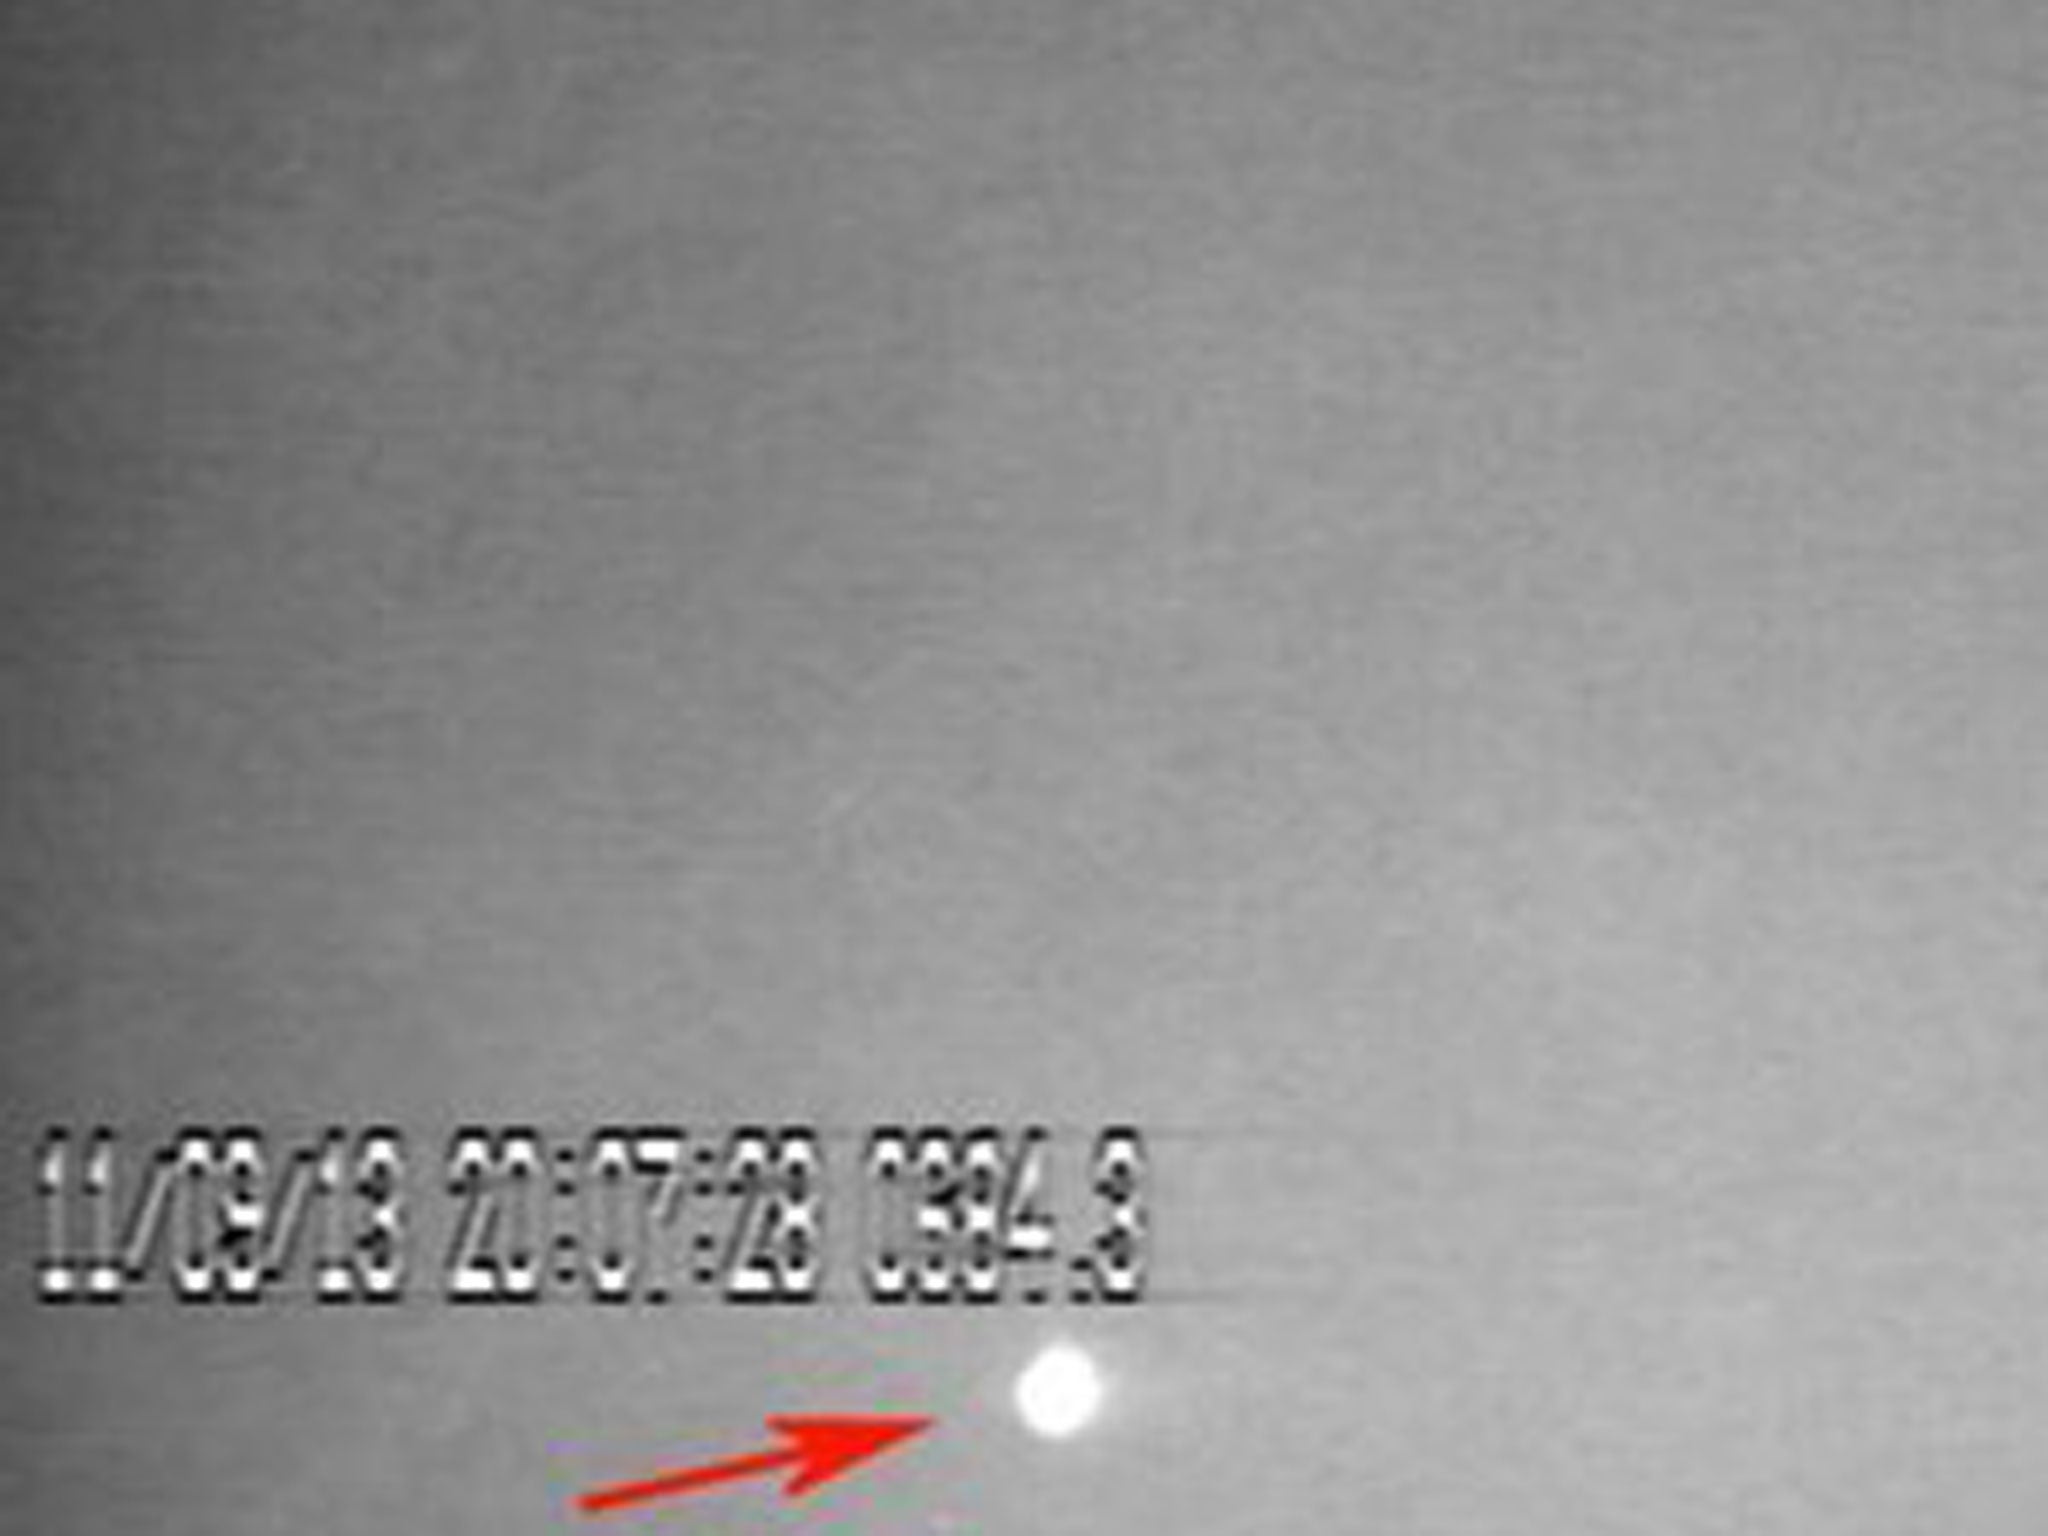 Actual footage: Astronomers say they have observed a meteorite weighing approximately half a tonne crashing into the Moon in September, creating a record-breaking impact visible on earth.